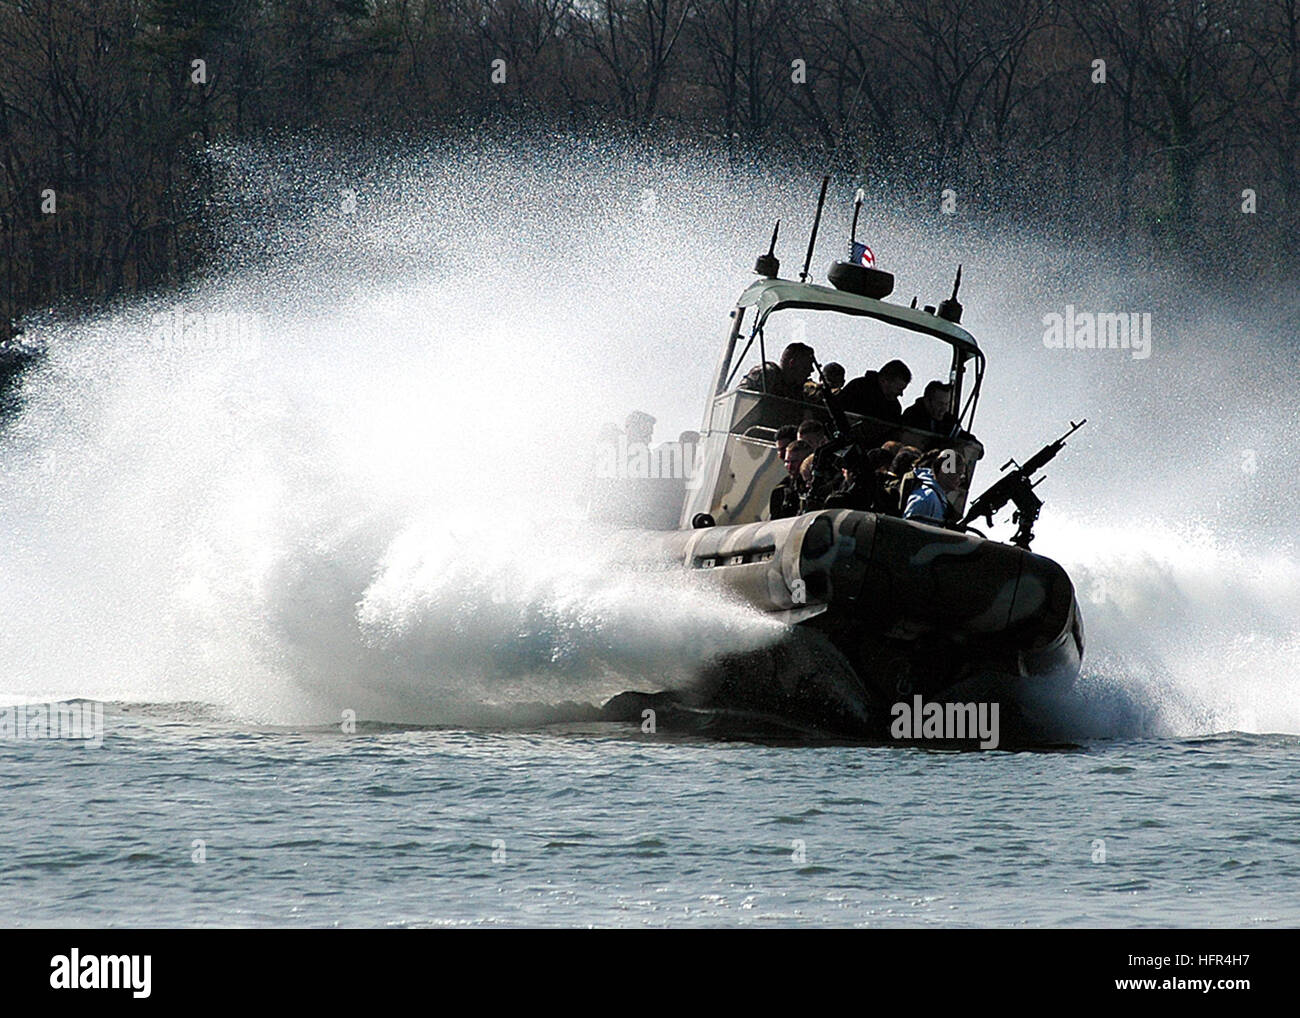 060406-N-5694H-002 Annapolis, Md. (April 6, 2006) - A small unit riverine craft assigned to U.S. Marine Training Detachment, Camp Lejeune, N.C., demonstrates a ÒJÓ turn for U.S. Naval Academy midshipmen in the Severn River. The riverine craft and their crews visited Annapolis for the U.S. Naval Institute 2006 Applied Naval History Conference, ÒRiverine Warfare: Back to the Future?Ó U.S. Navy photo by PhotographerÕs Mate Airman Cale Hanie (RELEASED) US Navy 060406-N-5694H-002 A small unit riverine craft assigned to U.S. Marine Training Detachment, Camp Lejeune, N.C., demonstrates a J turn for U Stock Photo